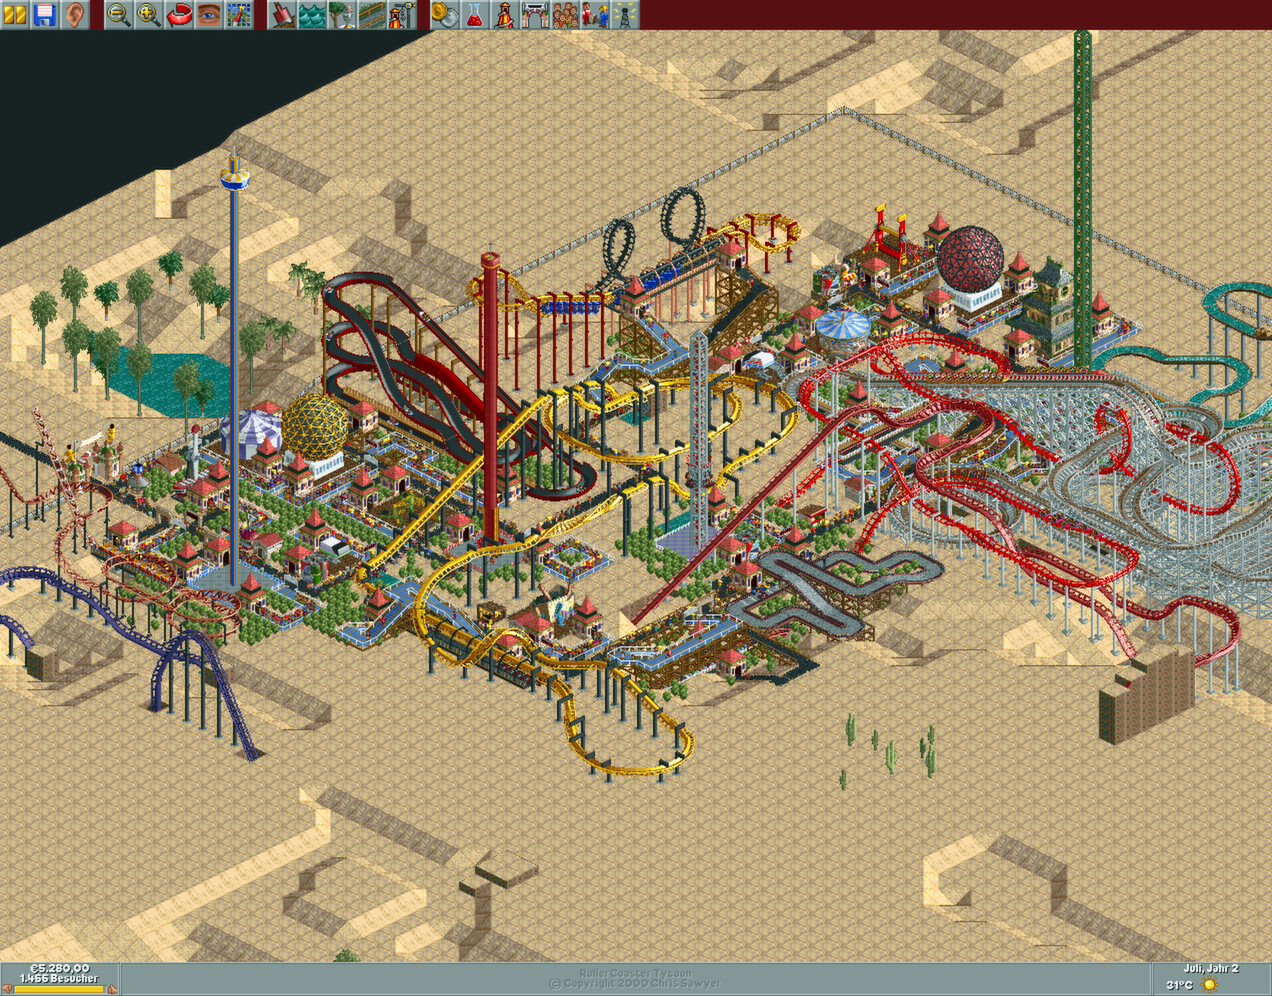 RollerCoaster Tycoon Classic Review - Does not add much to the series —  Steemit